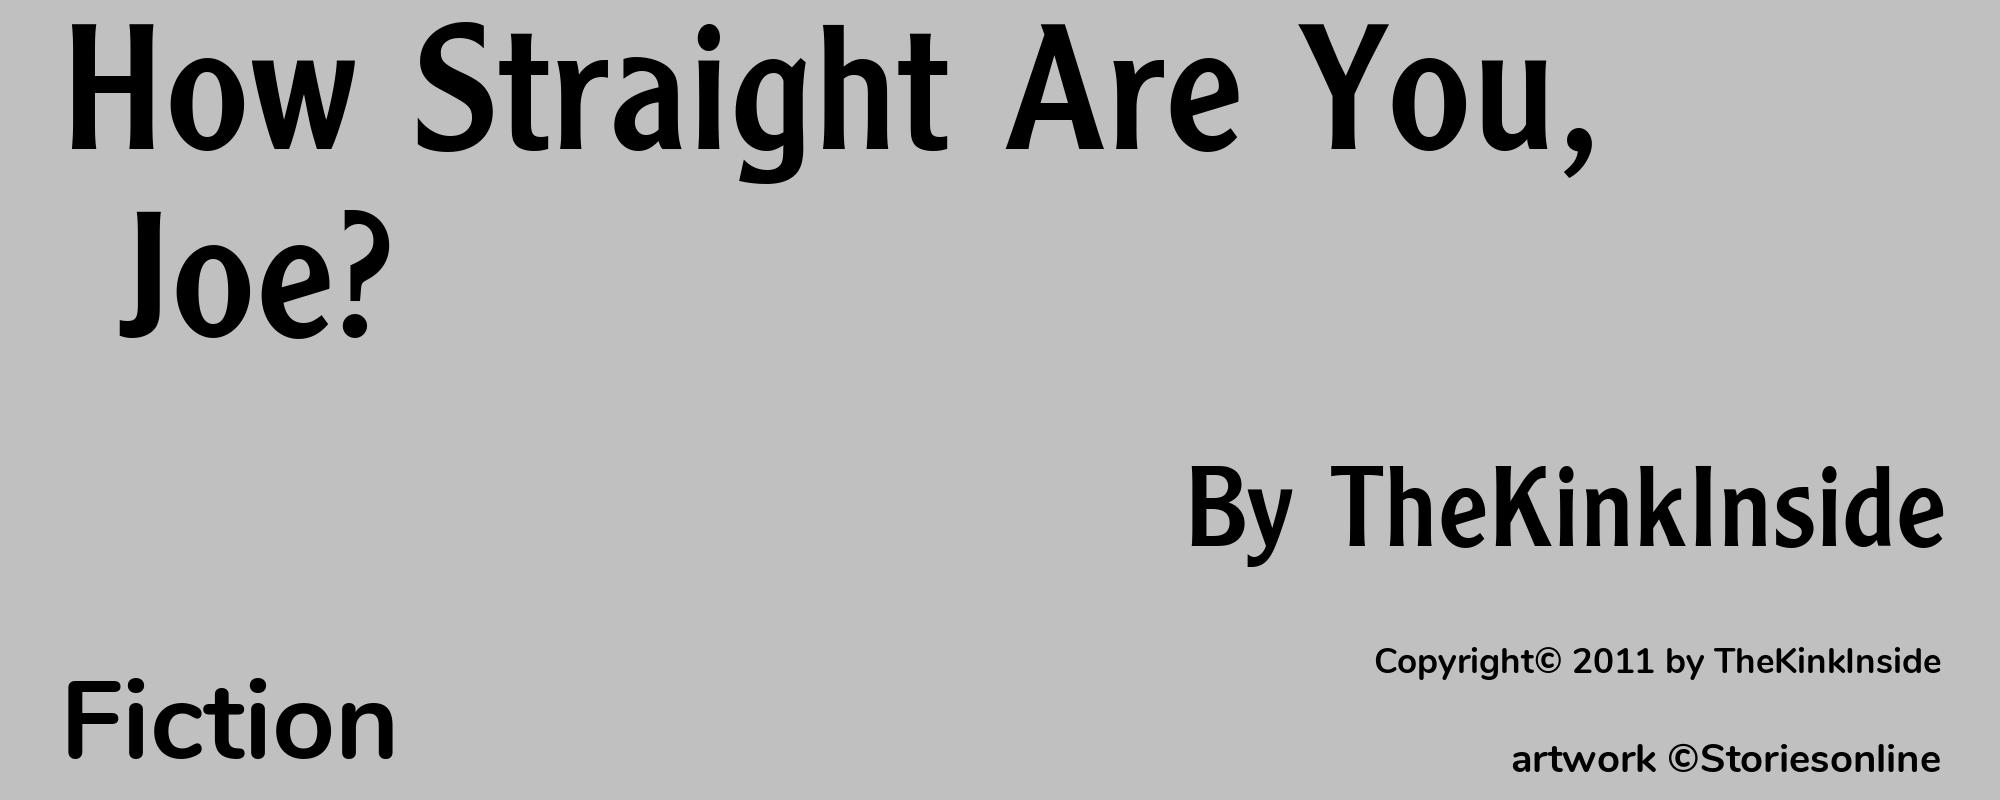 How Straight Are You, Joe? - Cover